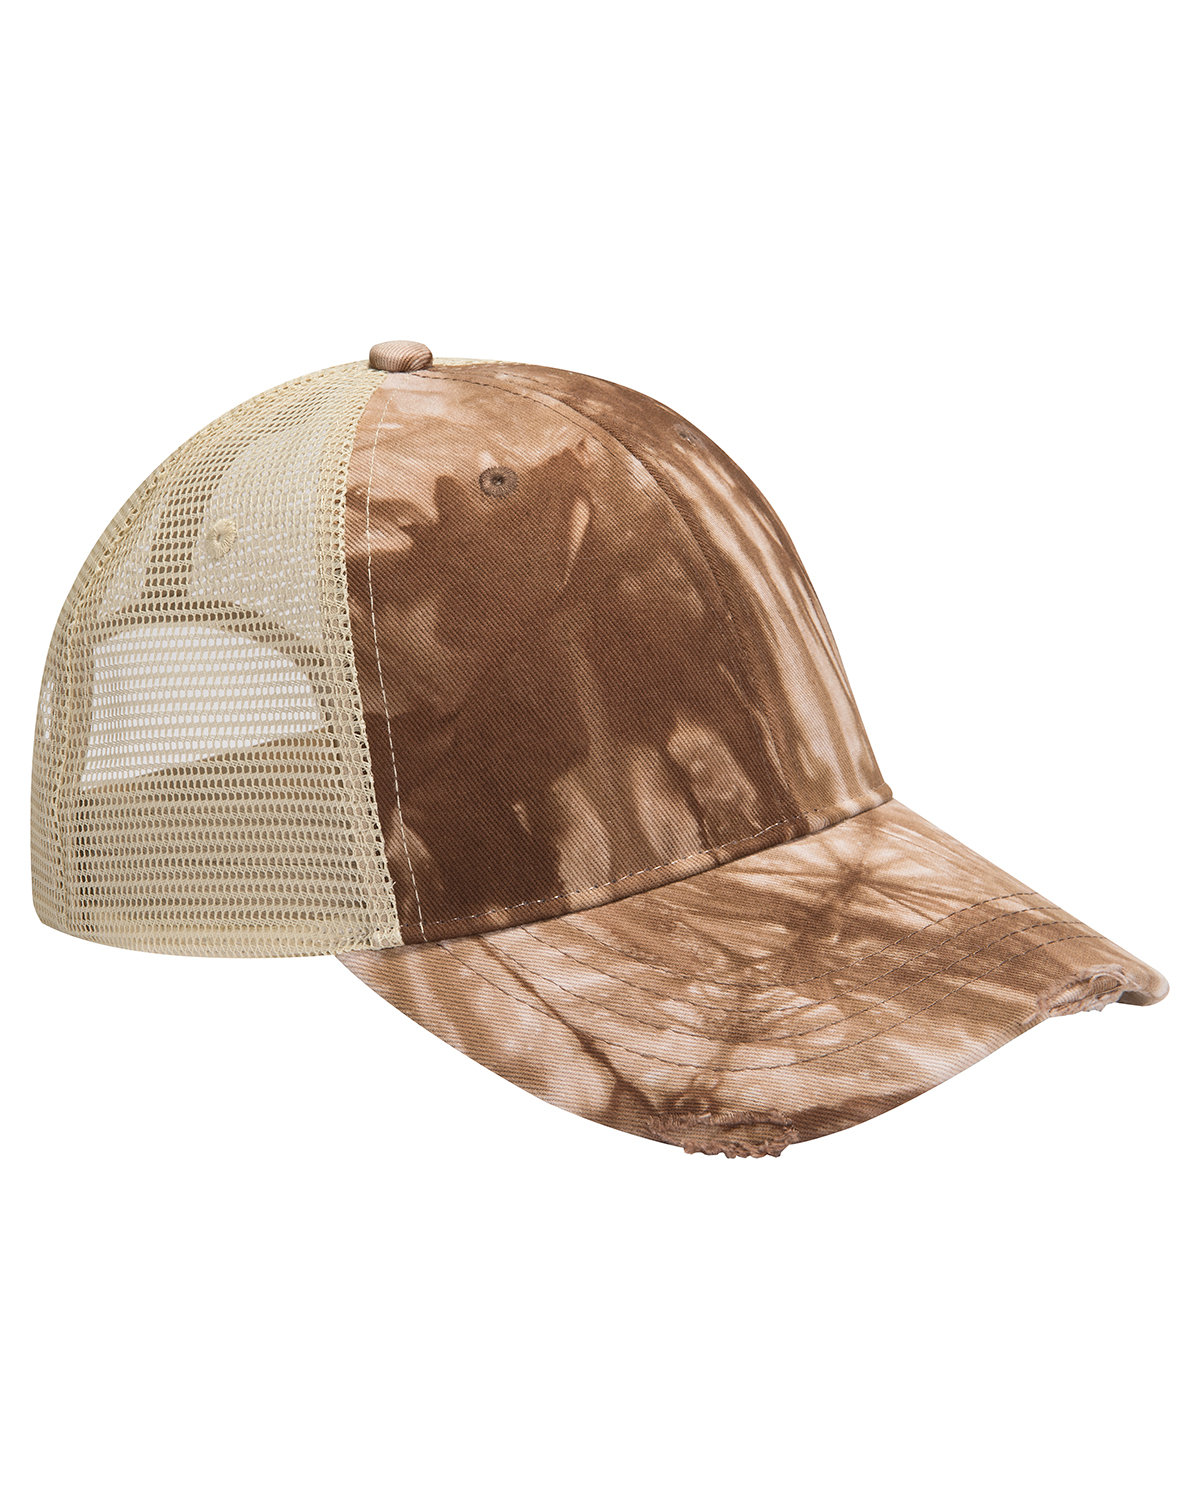 CMM Branded - Distressed Unstructured Trucker Cap - A1-1